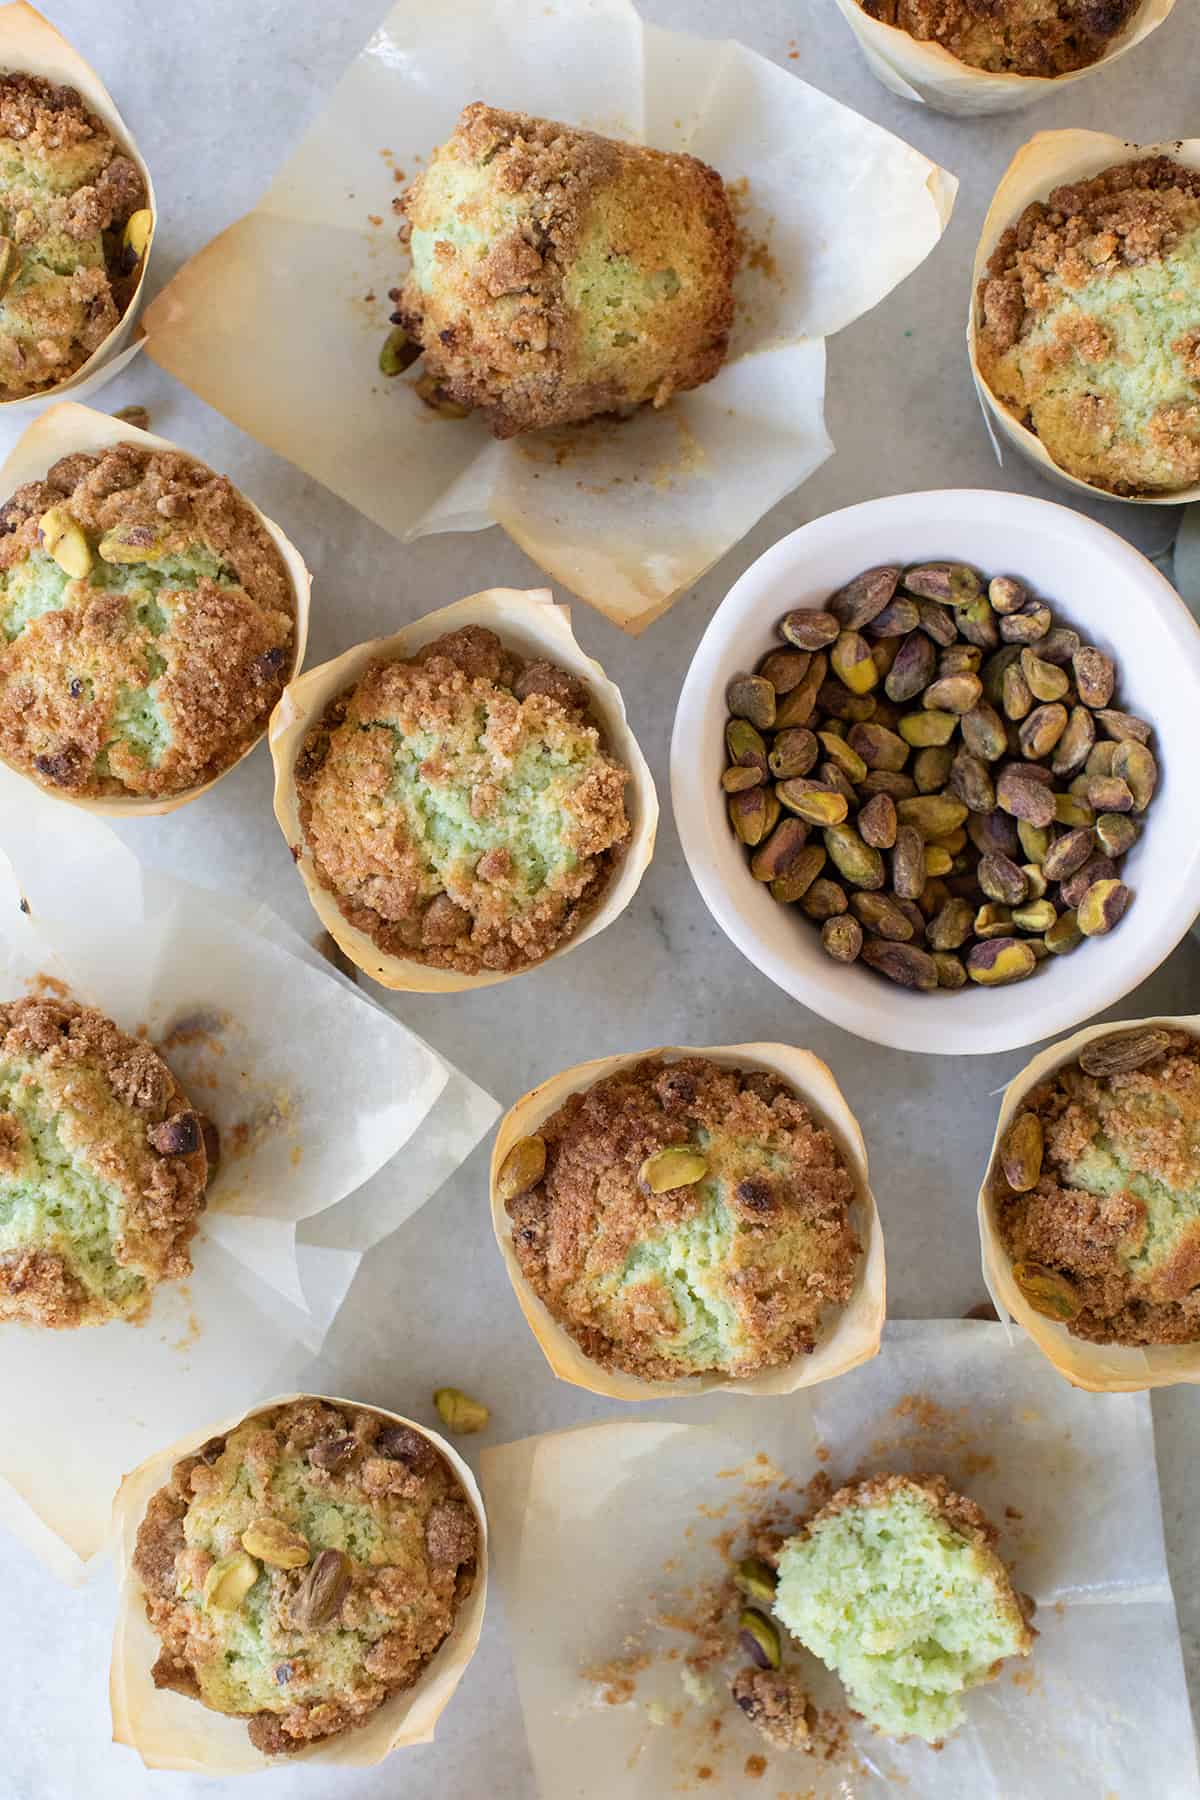 Pistachio muffins recipes with real pistachios. 